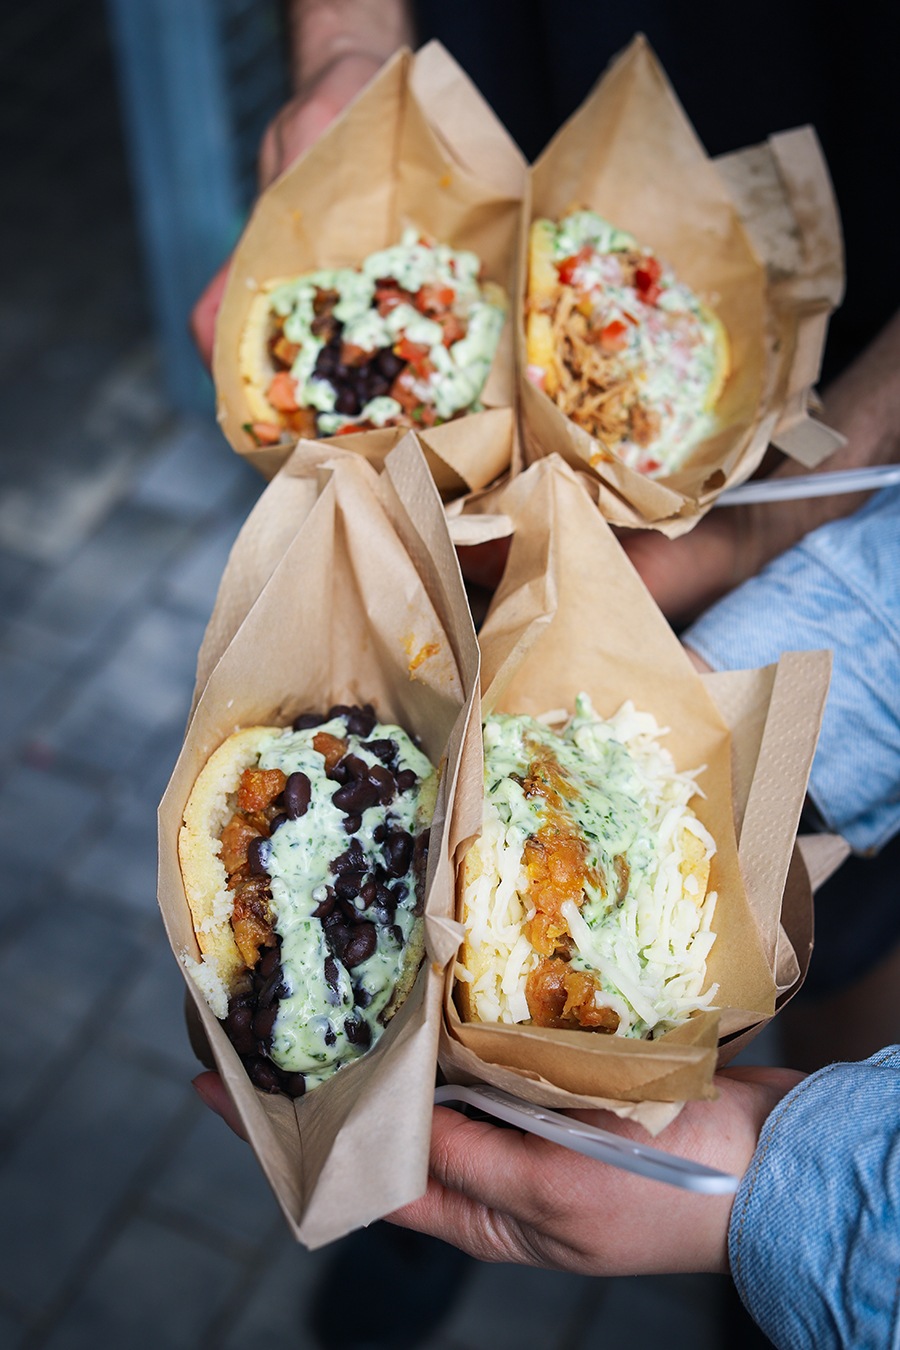 Two pairs of hands hold two arepas each, stuffed full of various fillings.